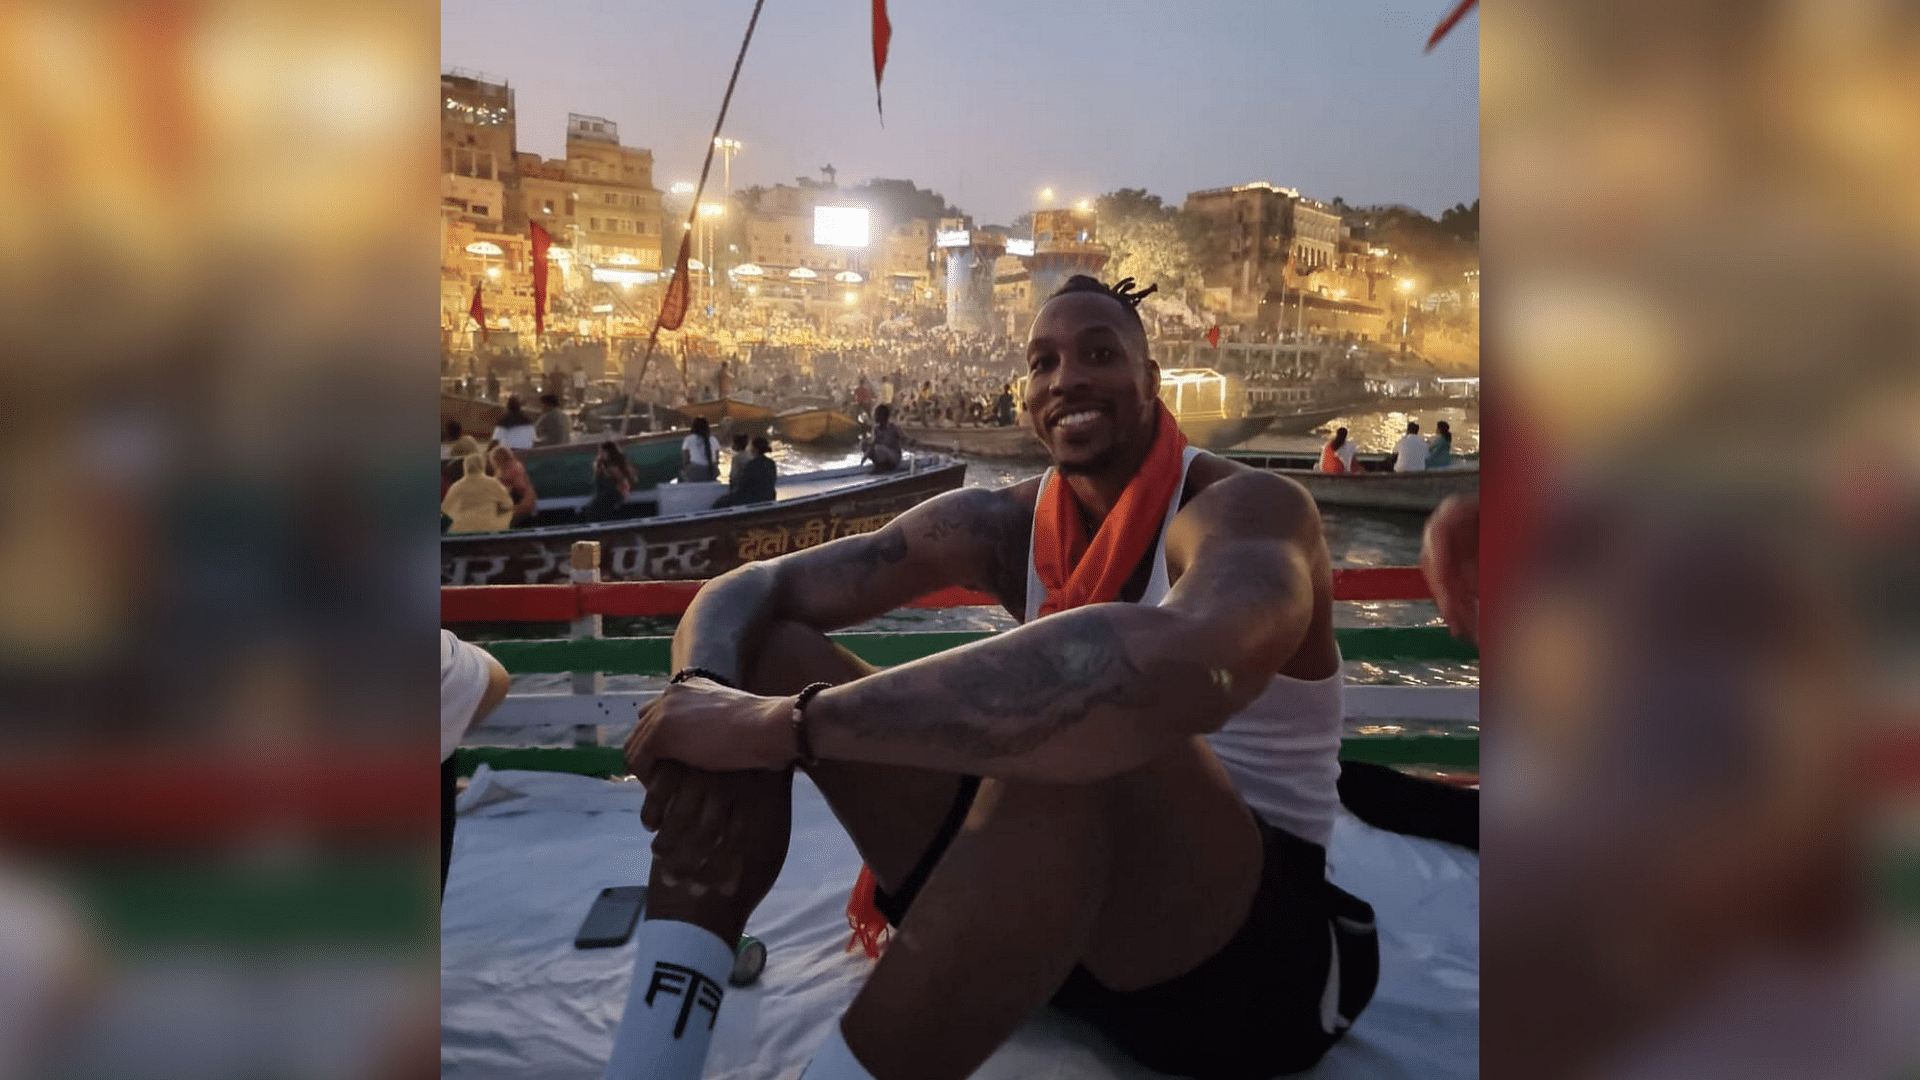 <div class="paragraphs"><p>Basketball player Dwight Howard visits Varanasi, shares picture online.</p></div>